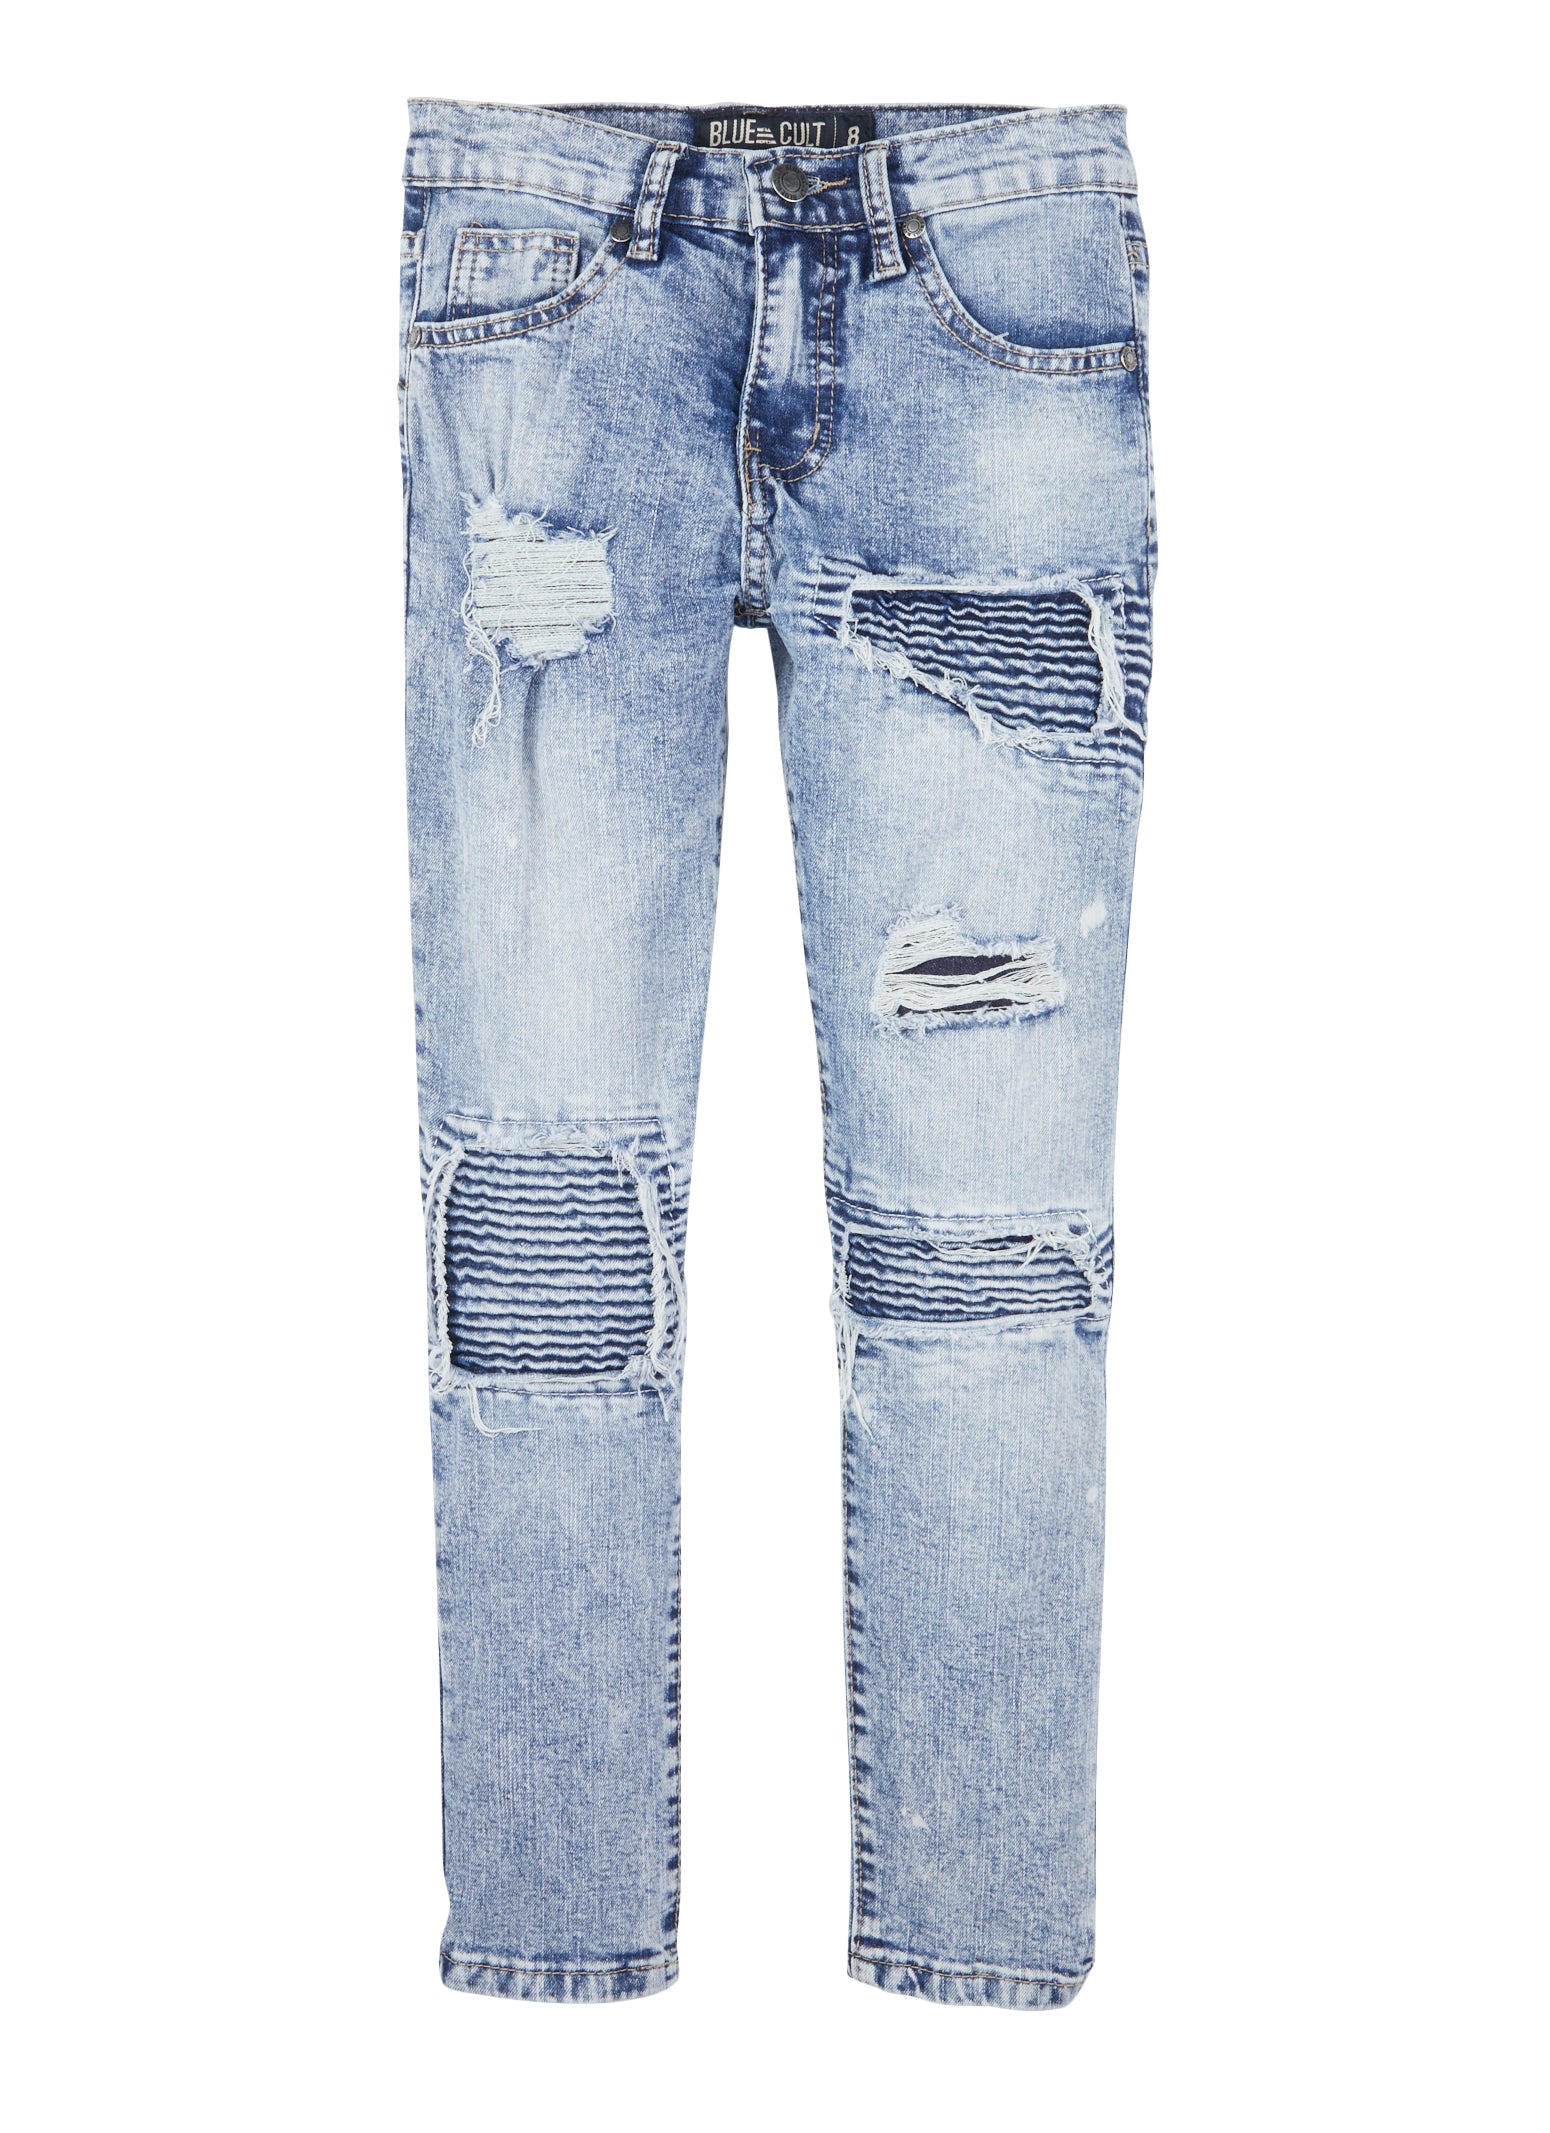 Boys Acid Wash Patch and Repair Skinny Jeans